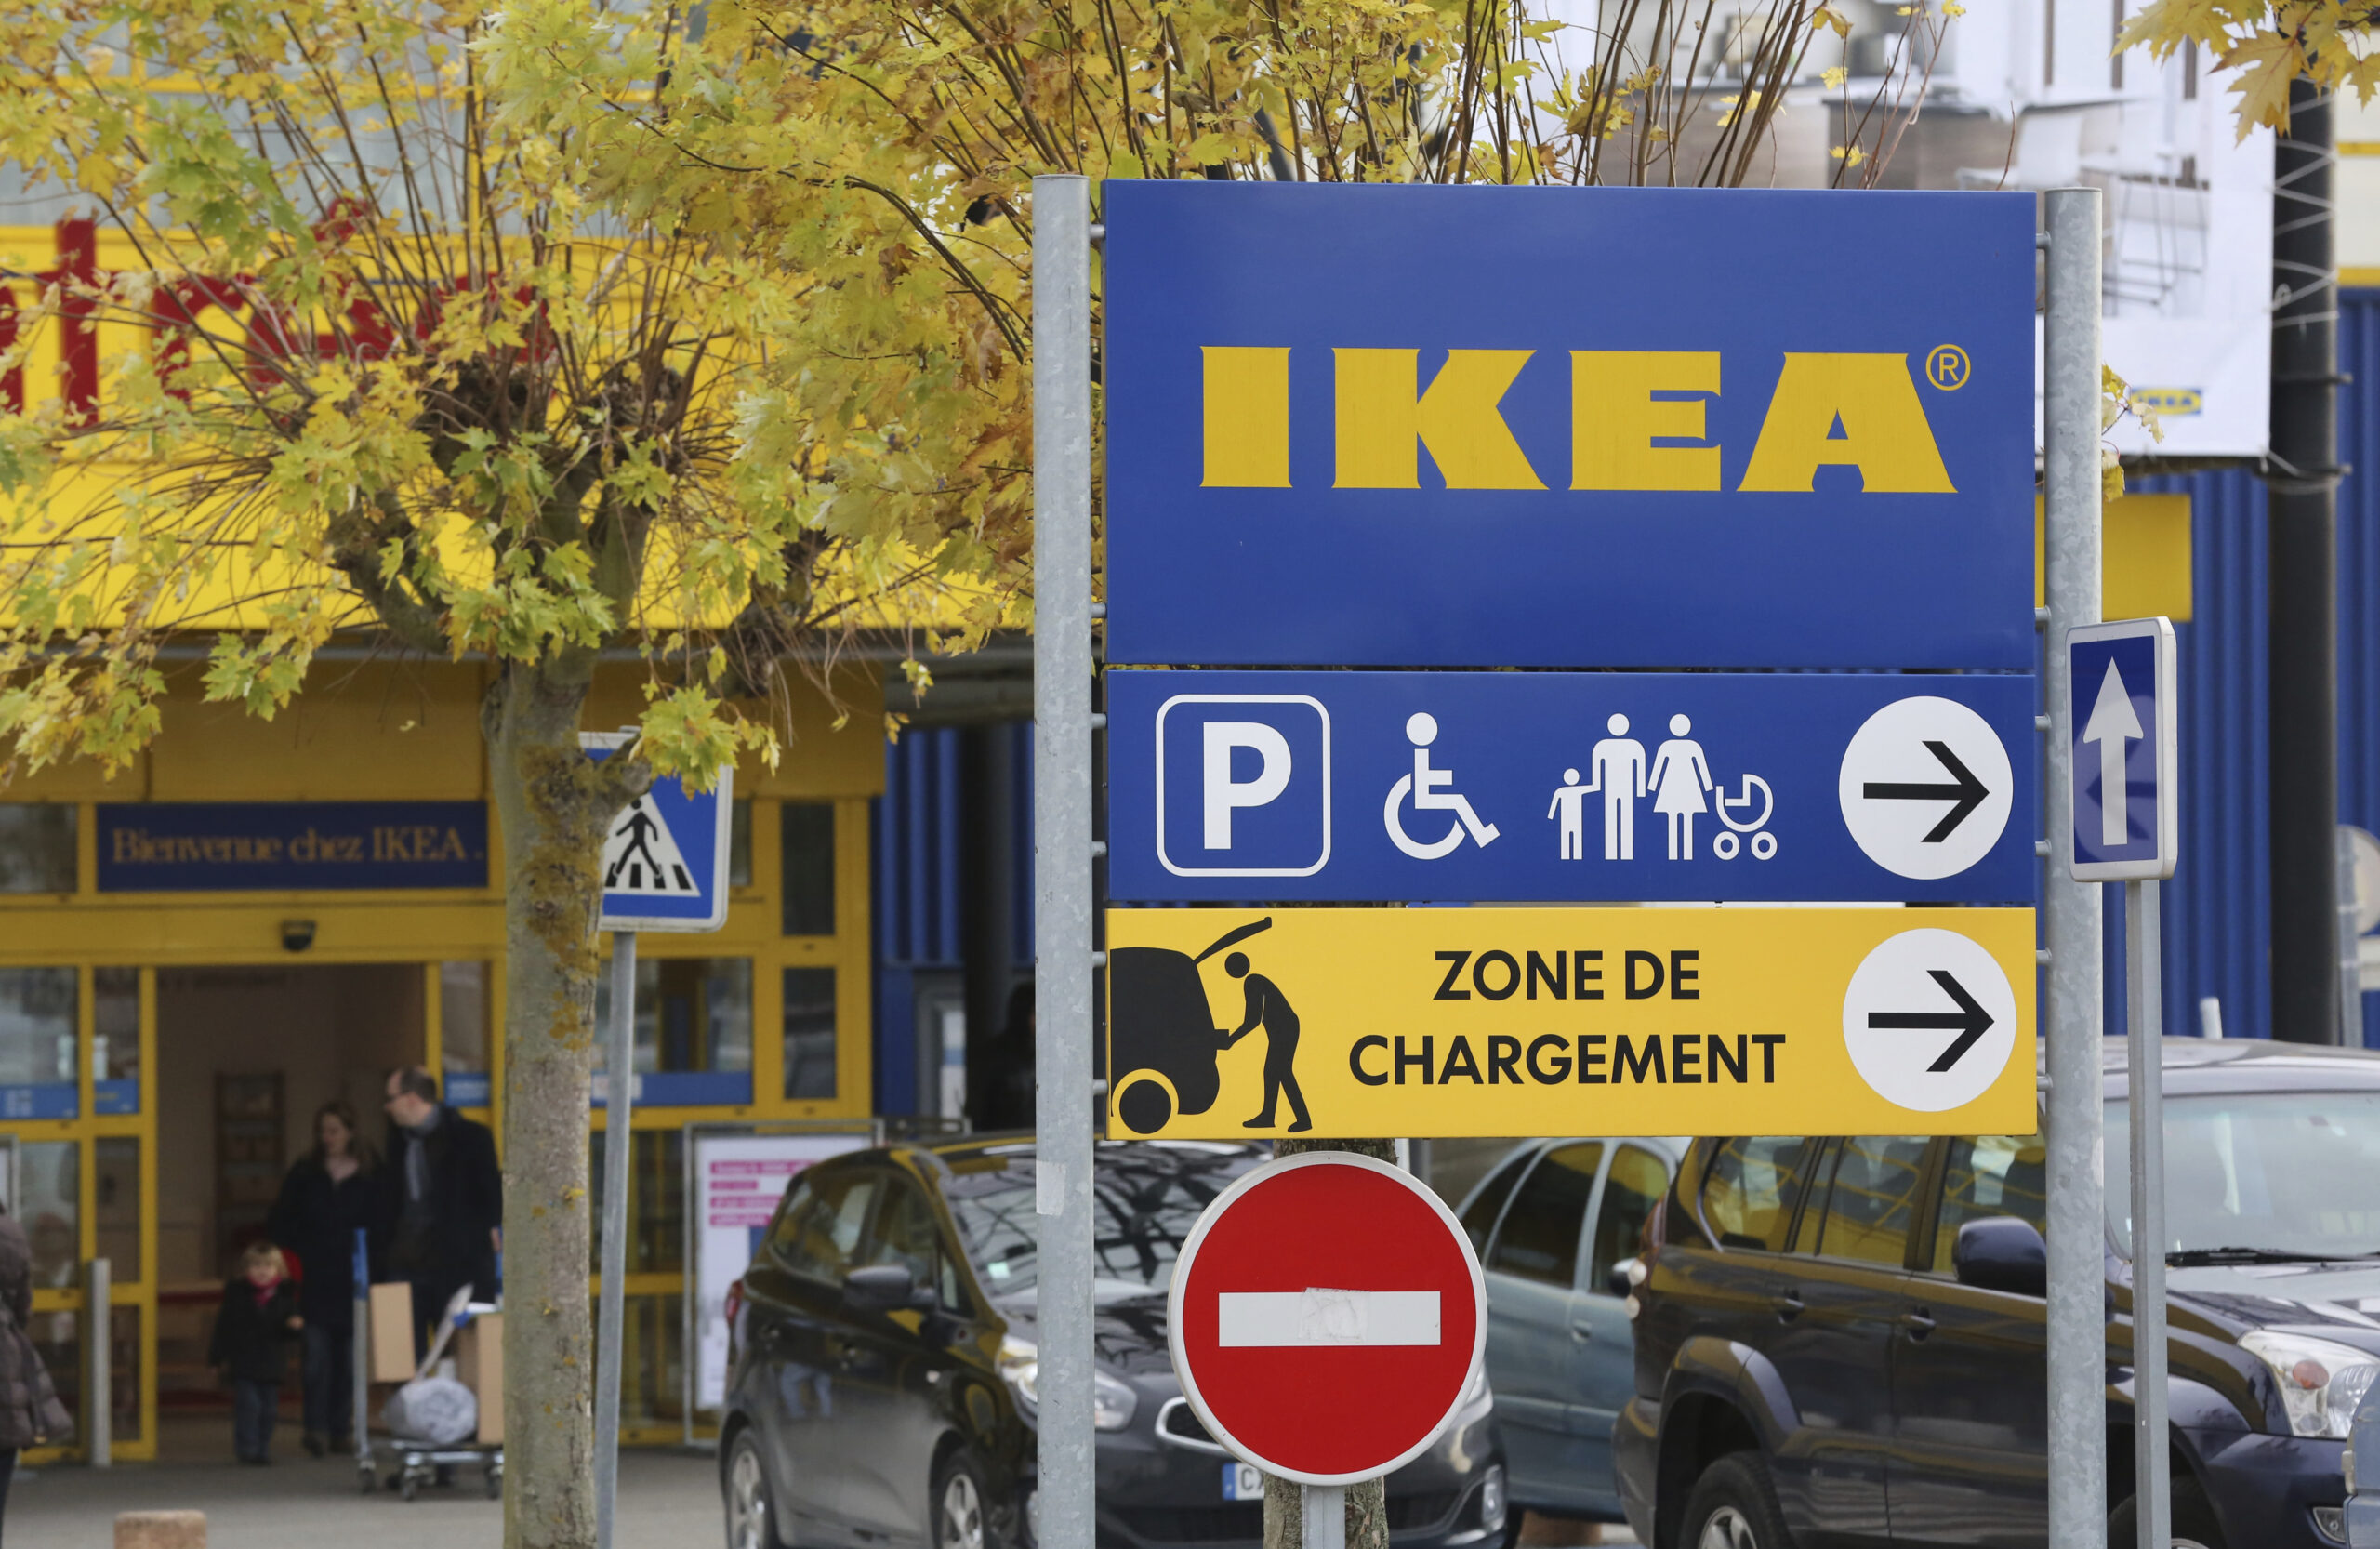 FILE - In this Wednesday, Nov. 30, 2013 file photo, customers leave an IKEA store in Plaisir, west of Paris. A French court has ordered home furnishings giant Ikea to pay more than $1.2 million in fines and damages Tuesday, June 15, 2021 over a campaign to spy on union representatives. (AP Photo/Remy de la Mauviniere, FIle)